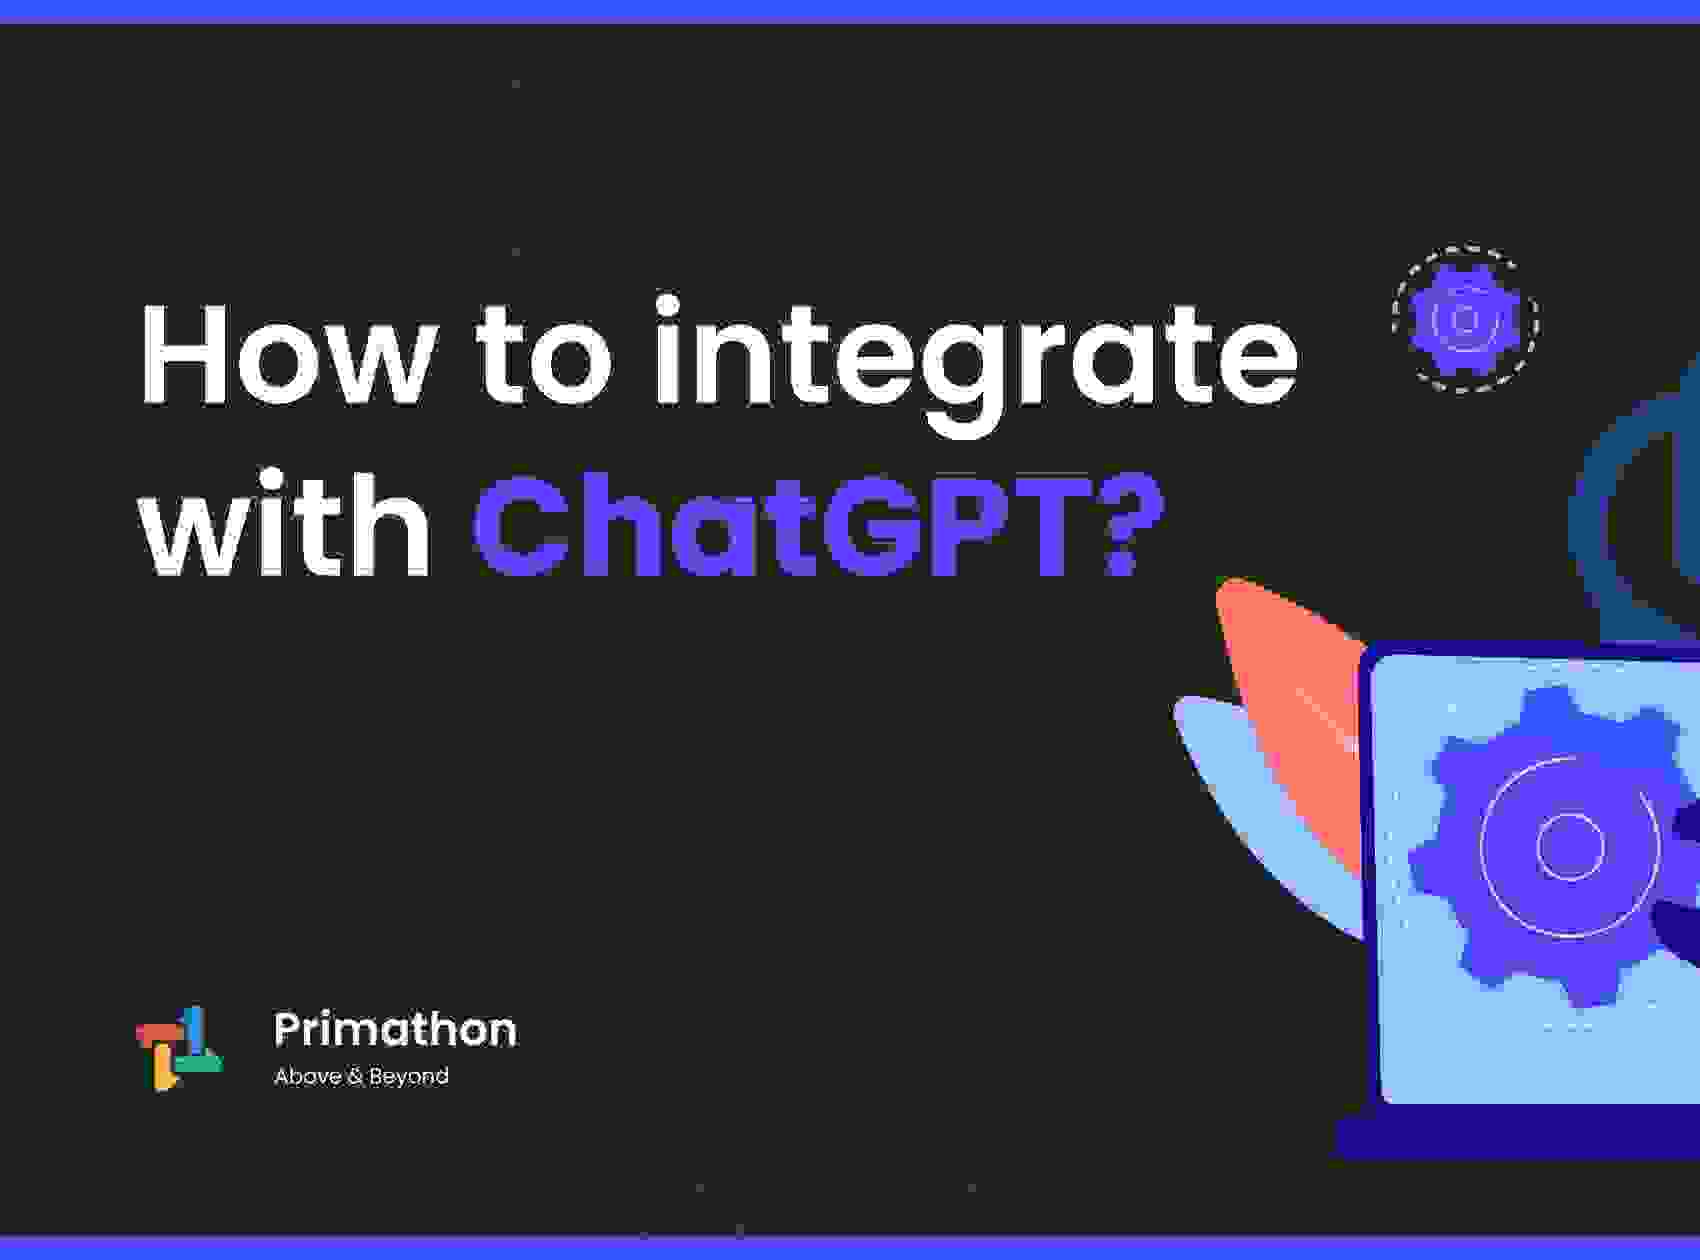 How to integrate with ChatGPT?